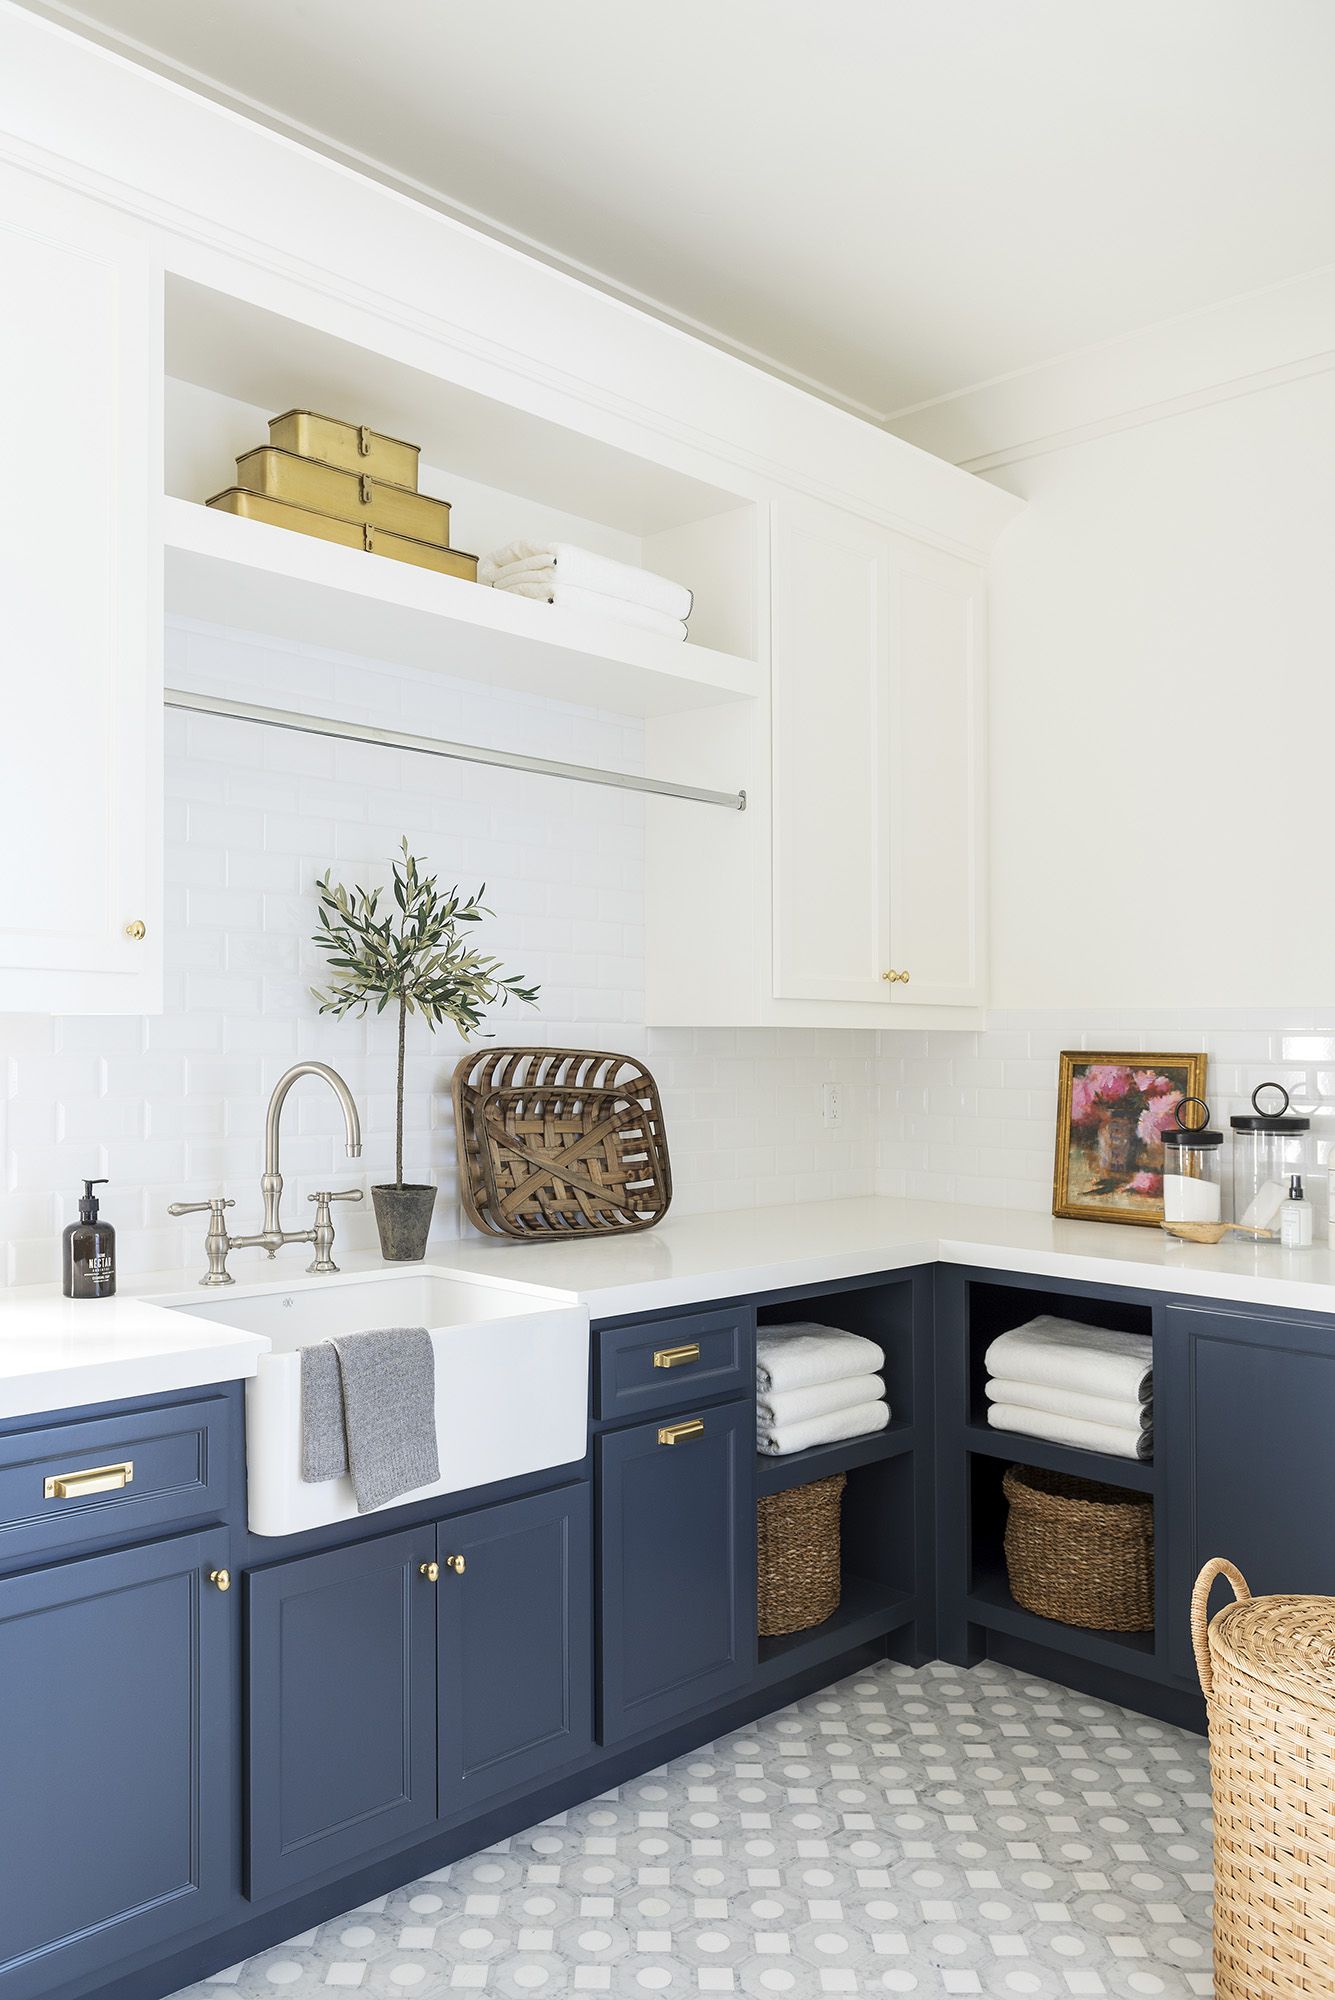 20 Clever Laundry Room Ideas   How to Organize a Laundry Room